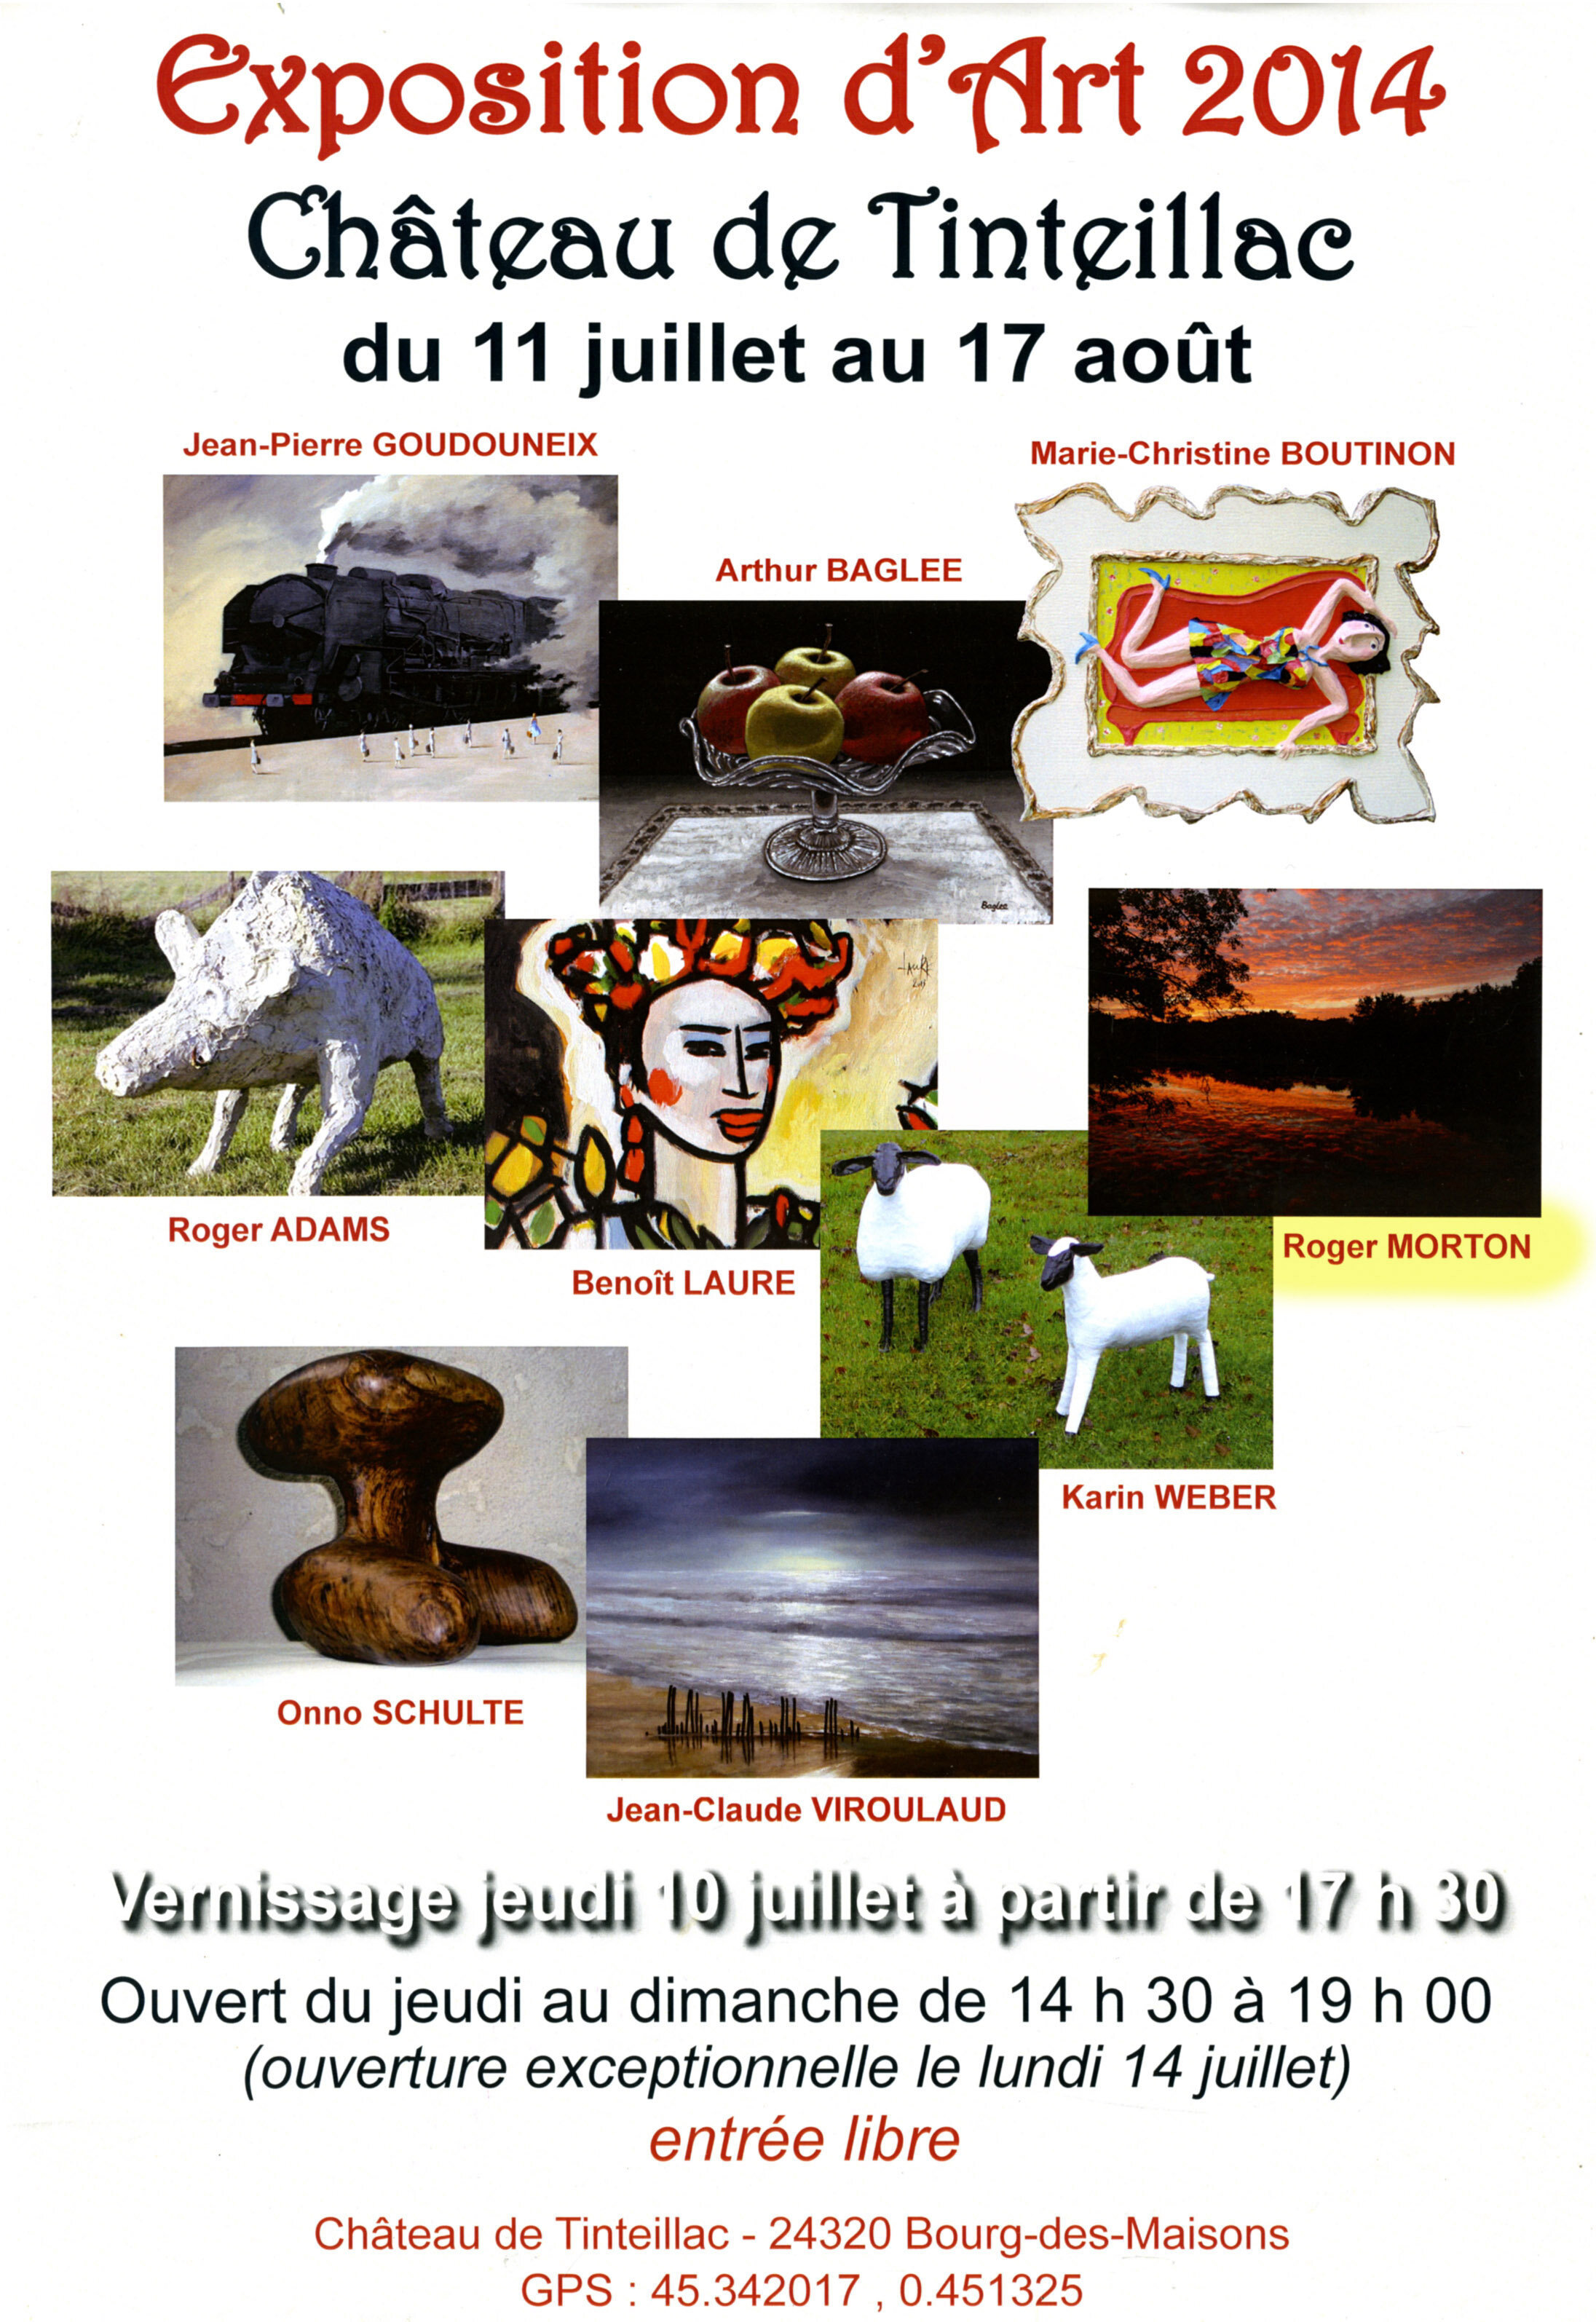 Poster for group exhibition at Chateau Tinteillac, Dordogne, France